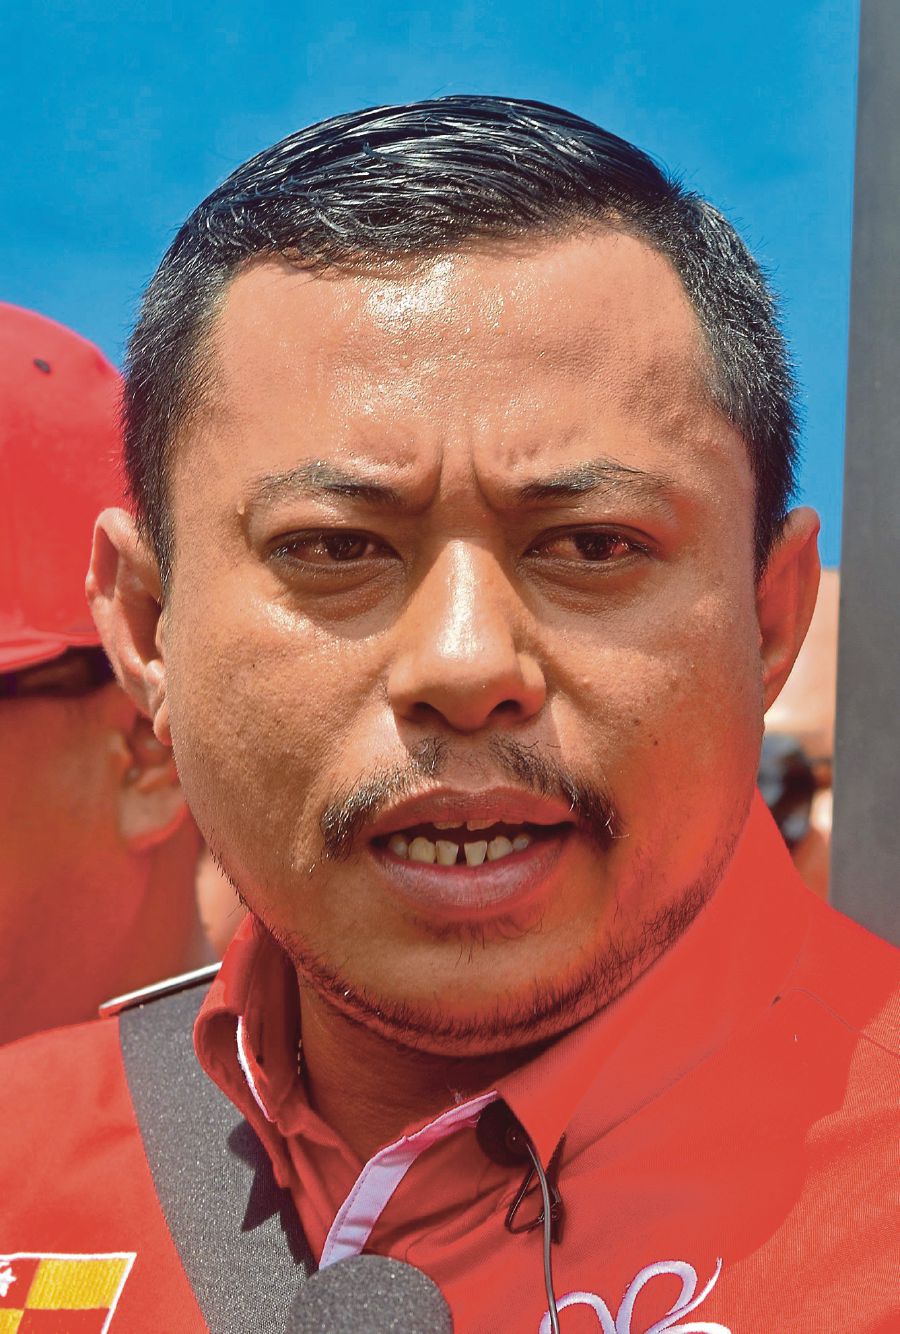 Wan Mohamad (pic), who is Shah Alam PPBM’s logistics and security chief, claimed he, and not Dr Mahathir, was the target of the chairs that were flung at the start of the incident. (pic by FAIZ ANUAR)